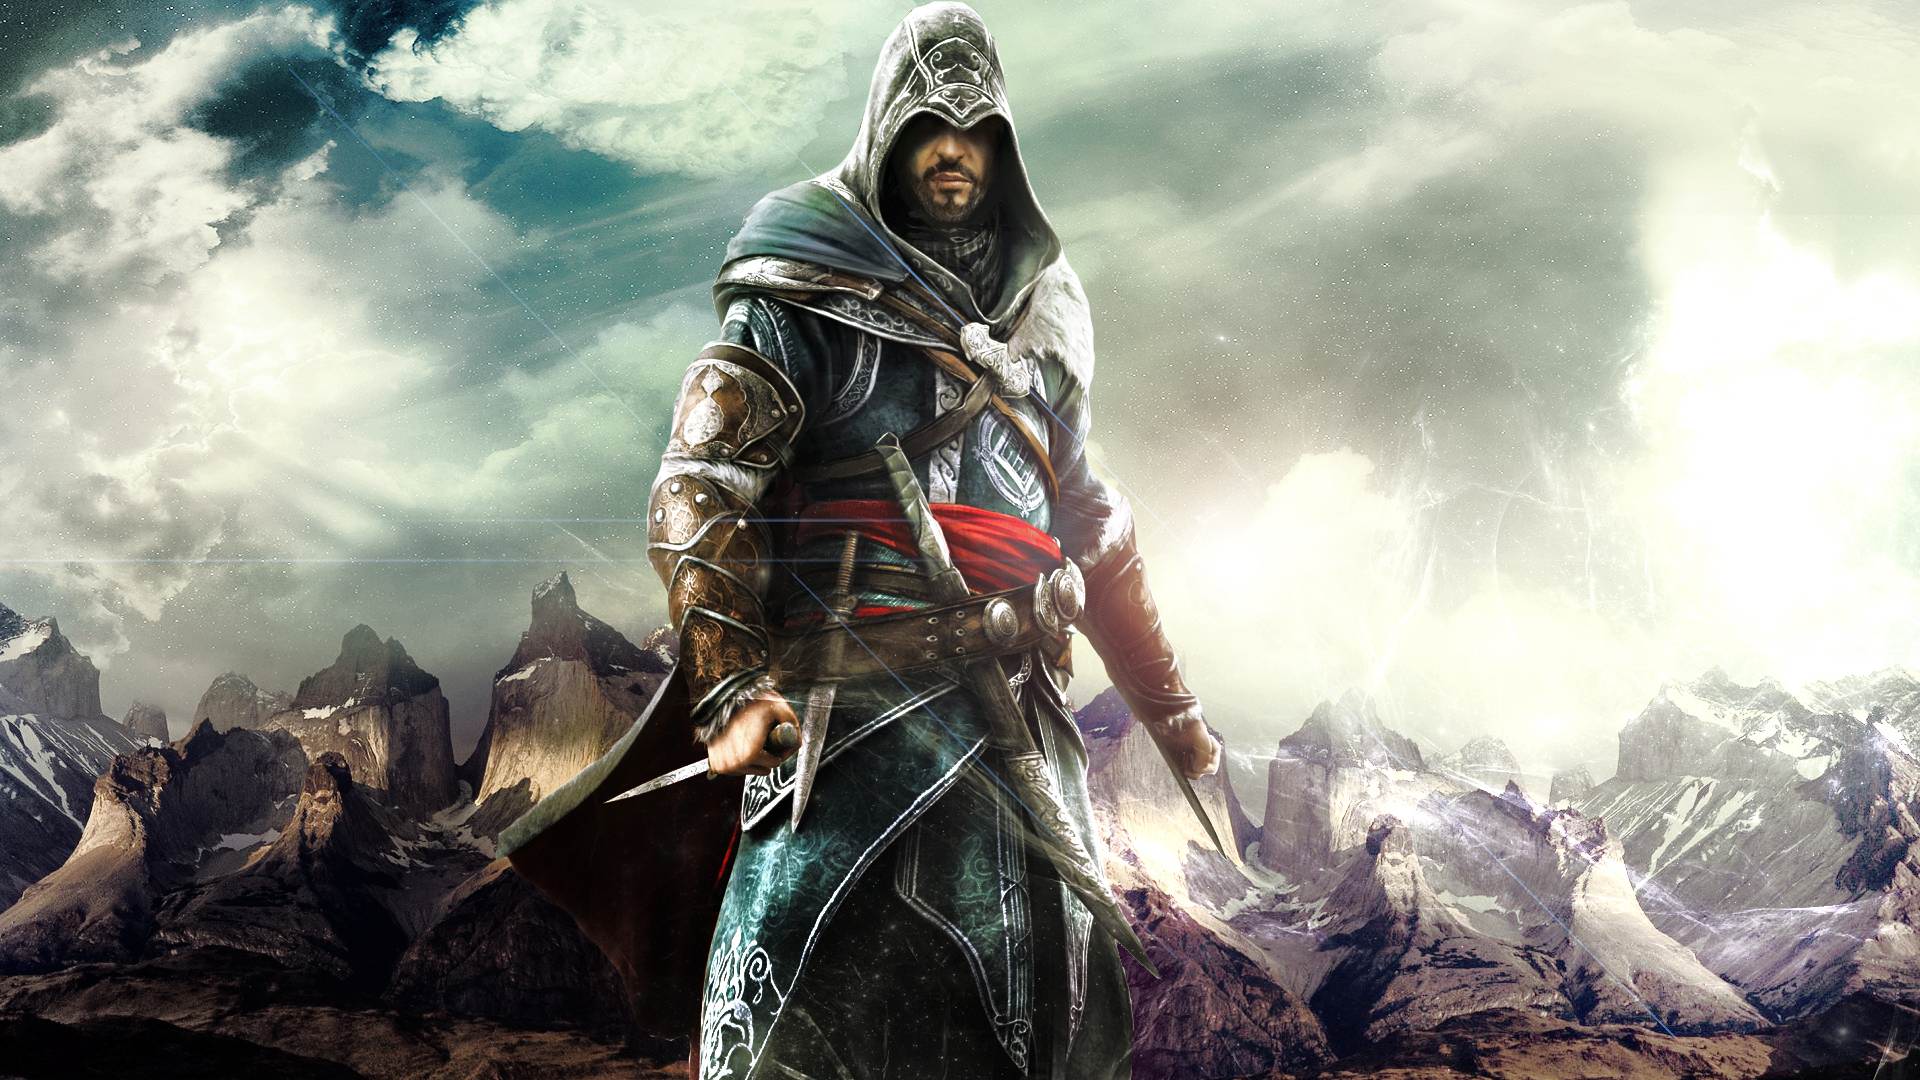 Download Assassin's Creed iPhone Images Backgrounds In 4K 8K Free Wallpaper  